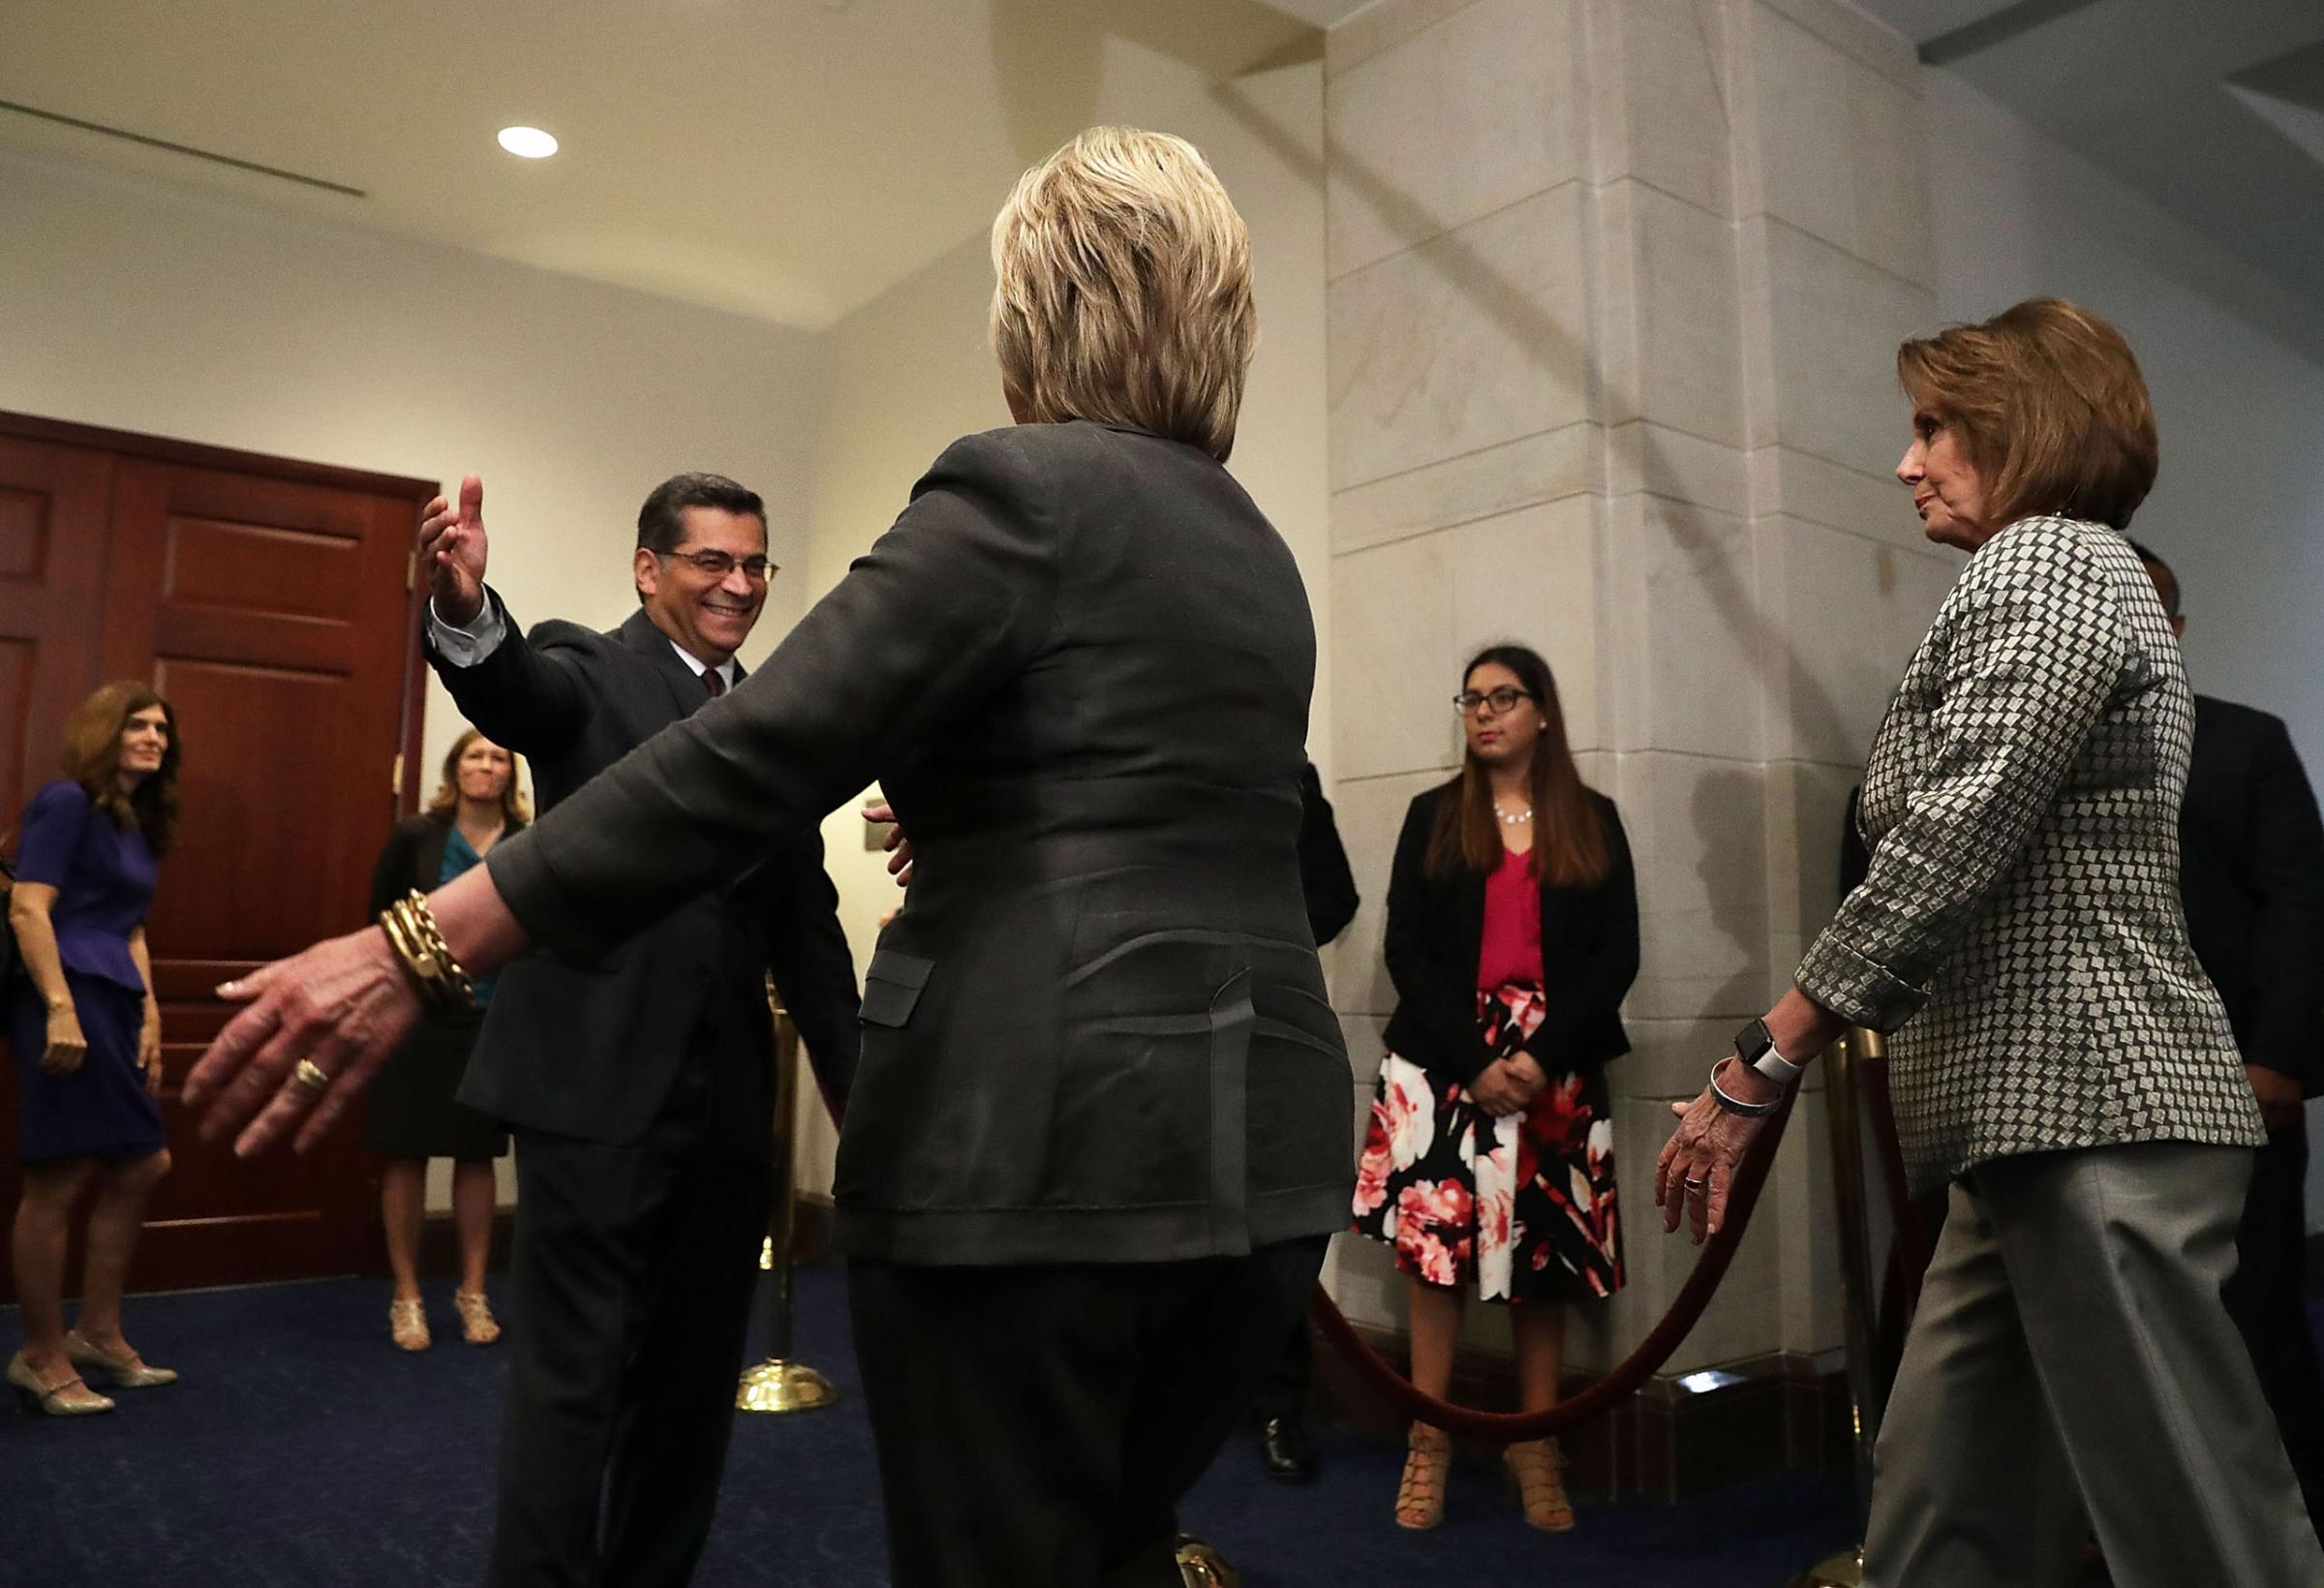 Democratic presidential candidate Hillary Clinton (C) is greeted by House Democratic Caucus Chair Xavier Becerra as she arrives to meet with House Democrats on Capitol Hill in Washington, D.C. on June 22, 2016.